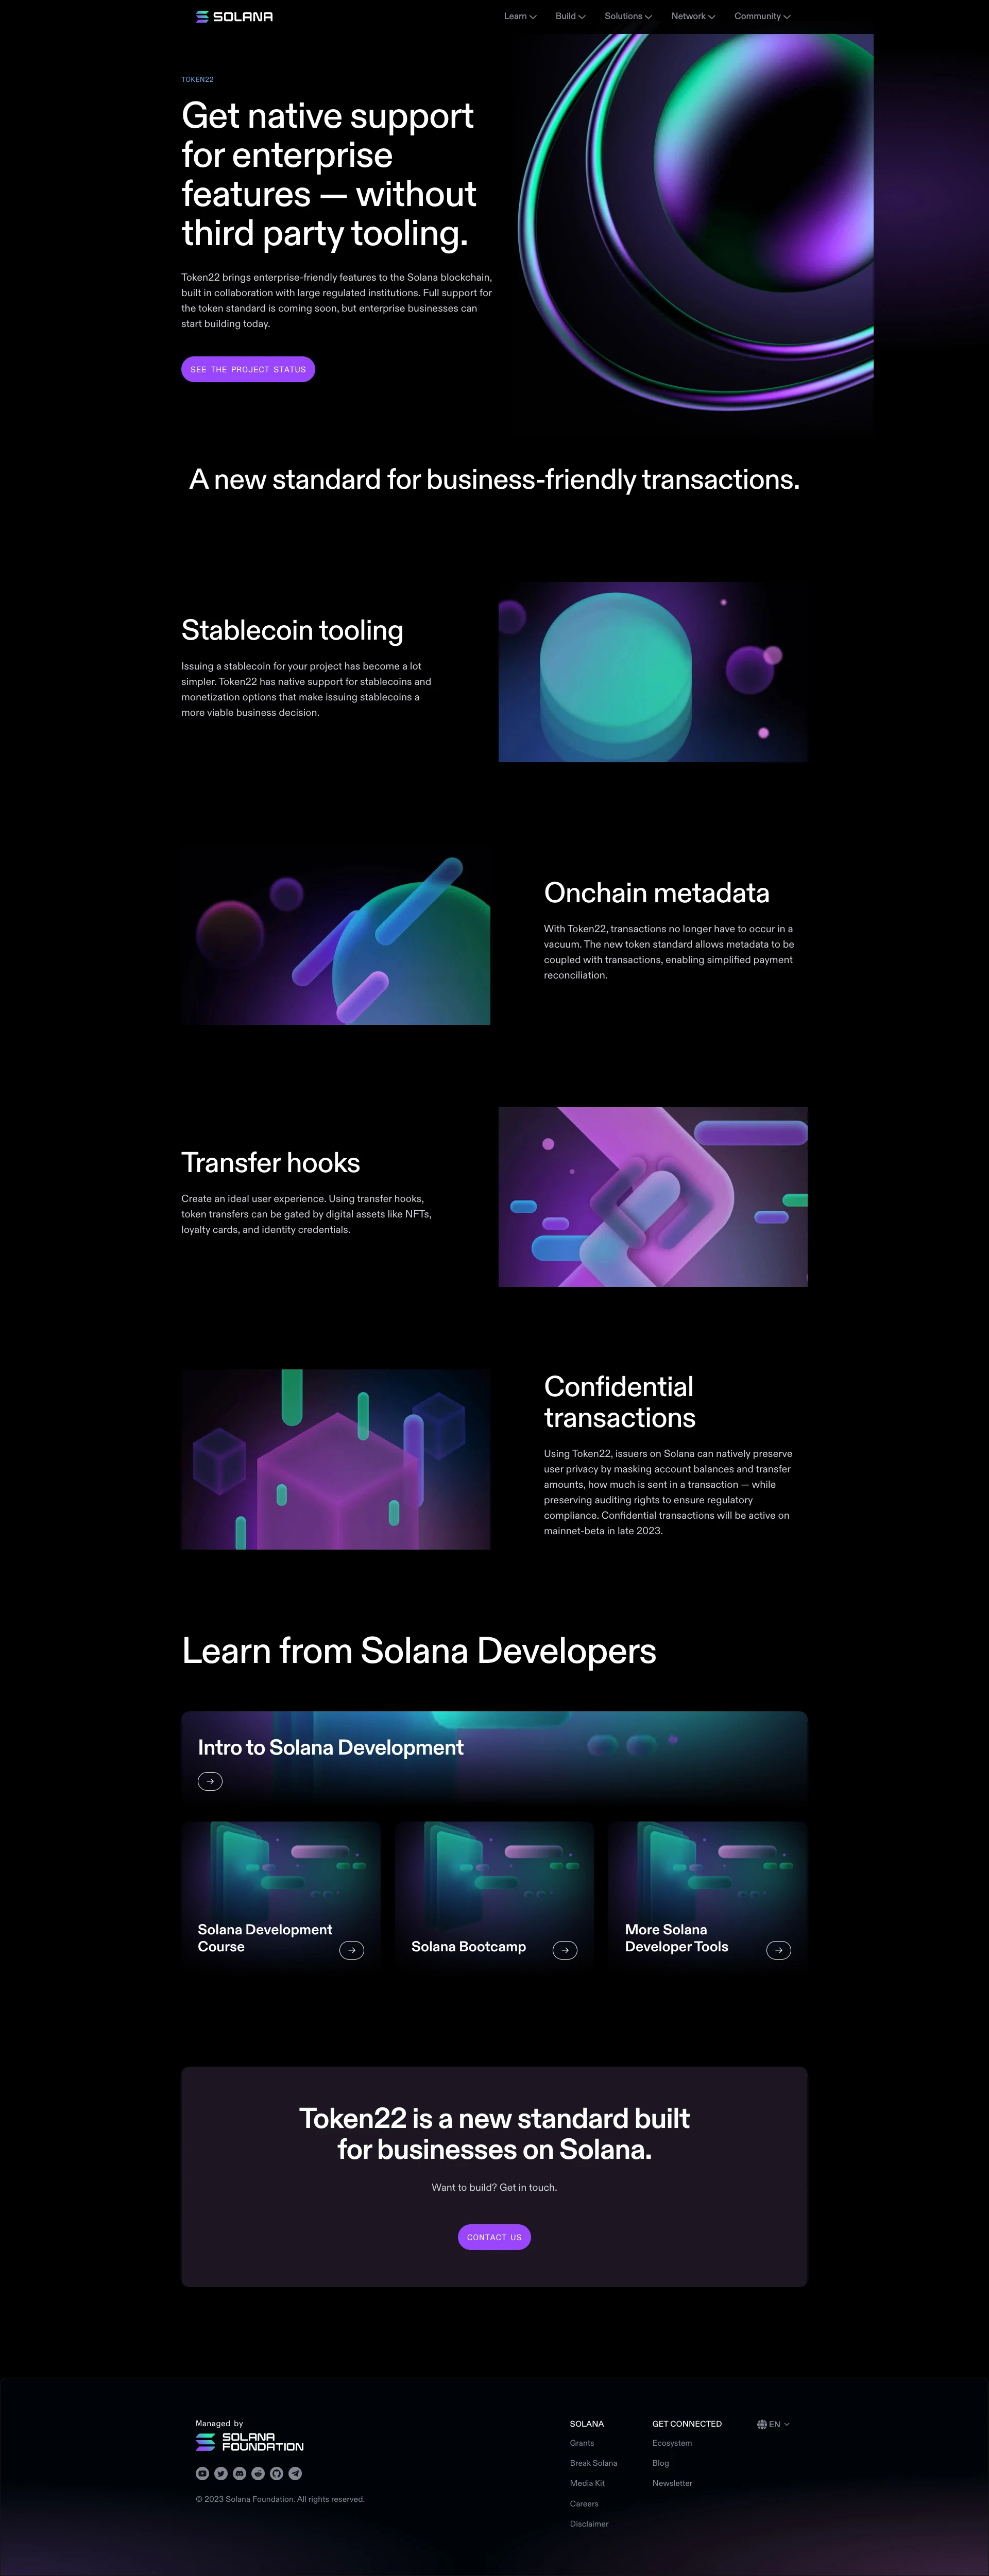 Solana Landing Page Example: Powerful for developers. Fast for everyone. Bring blockchain to the people. Solana supports experiences for power users, new consumers, and everyone in between.